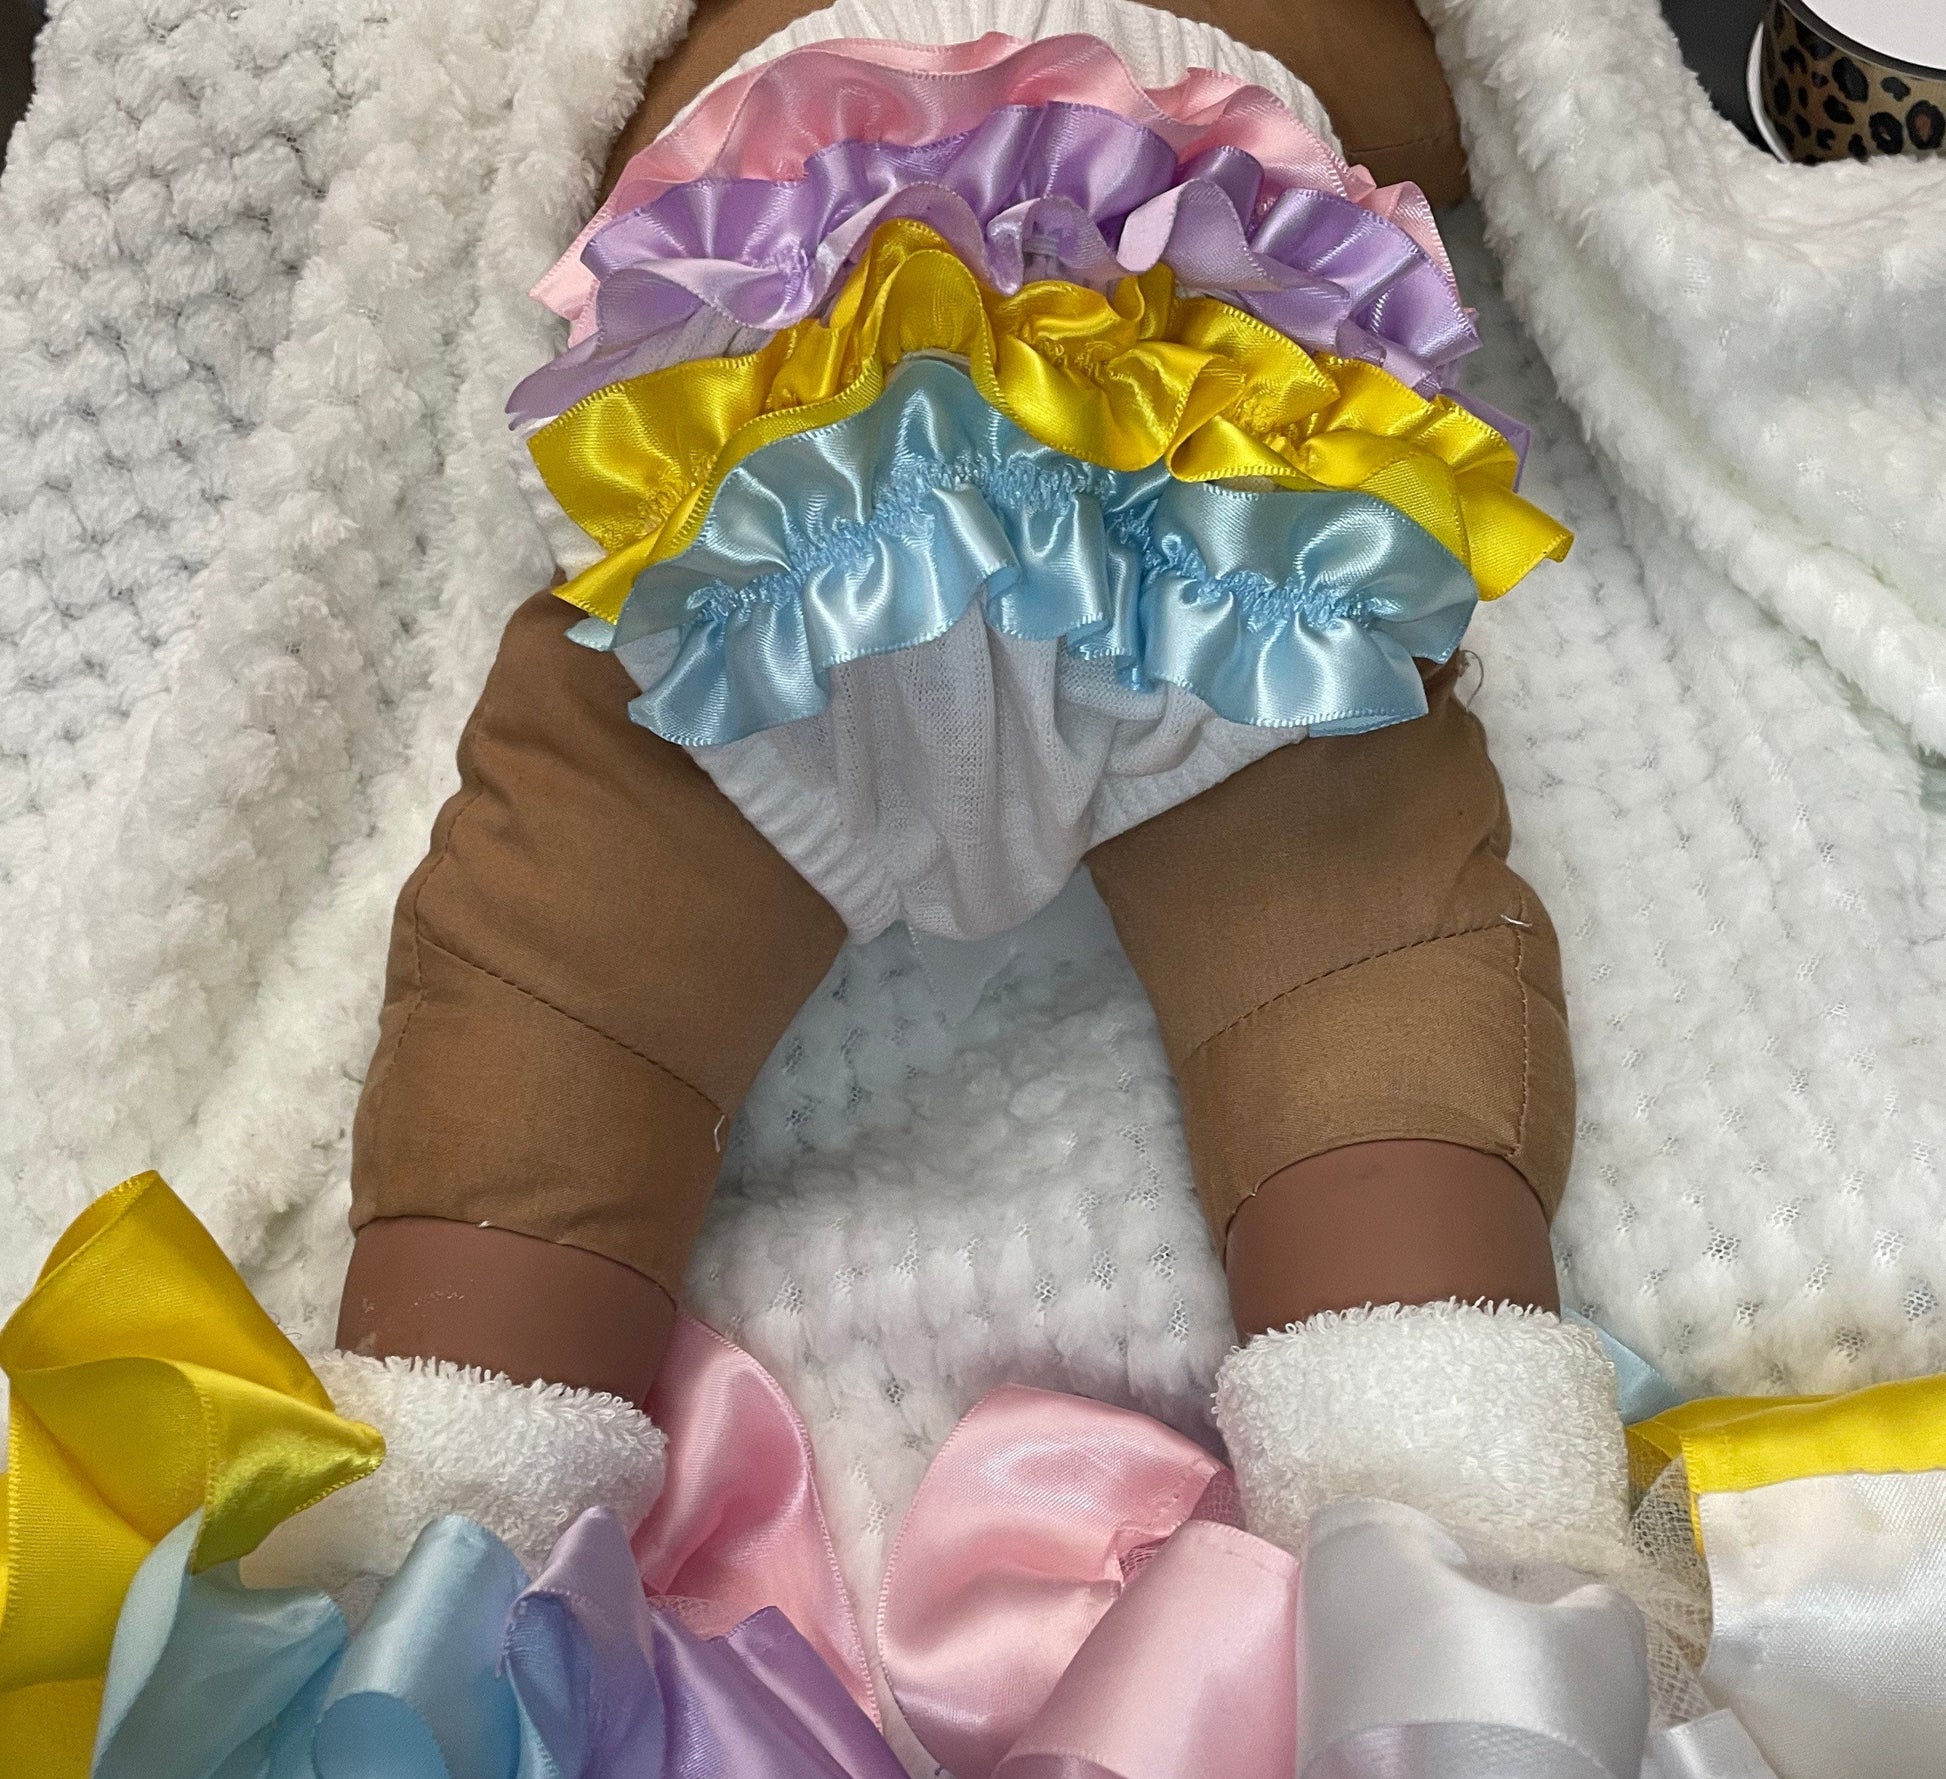 Custom ruffle butts|custom diaper covers| baby girl diaper cover|going home outfit - ReignBowsNtoes